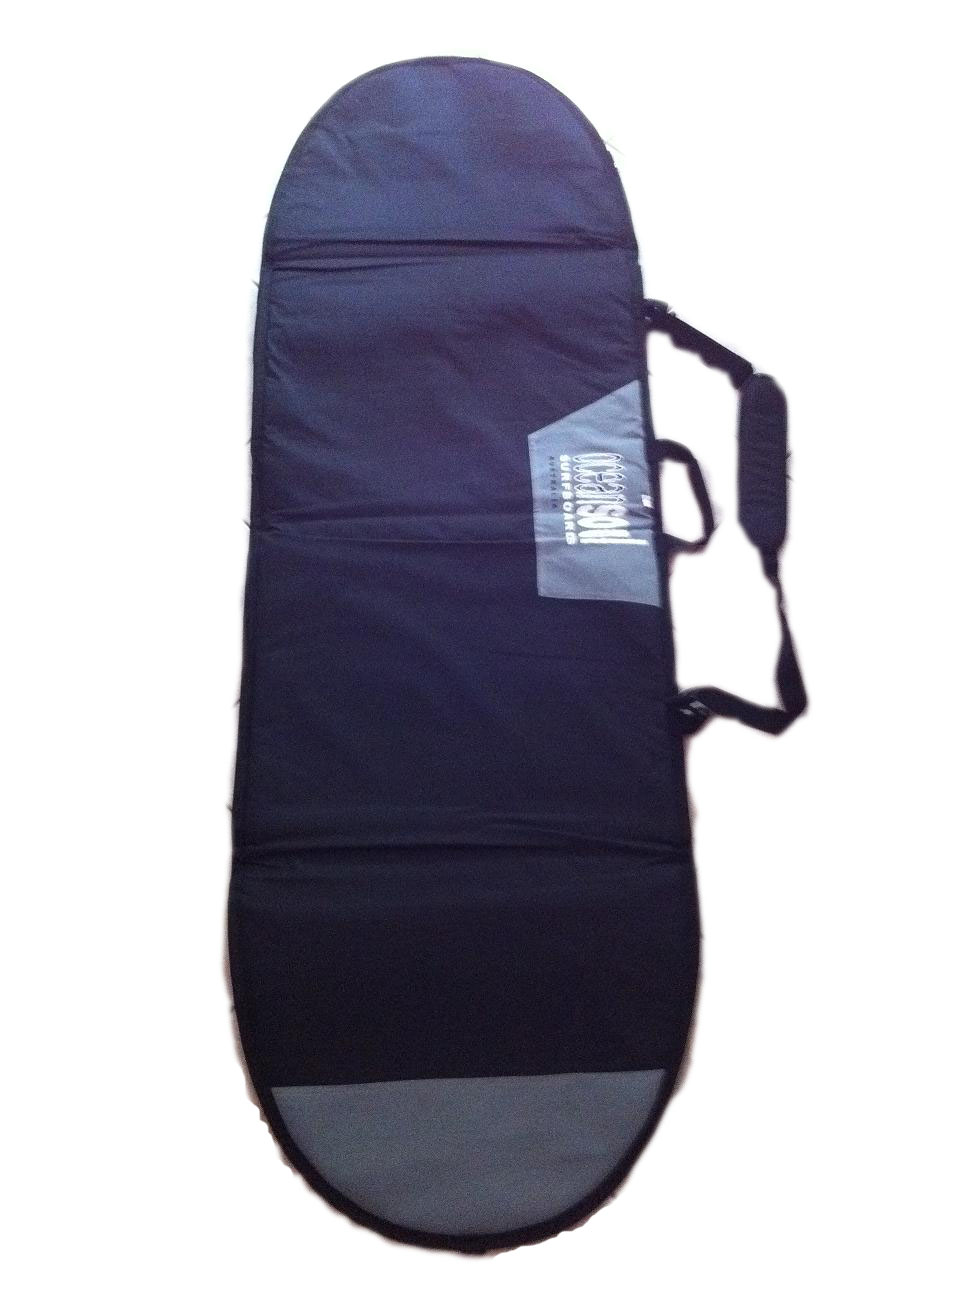 Surfboard Travel Cover